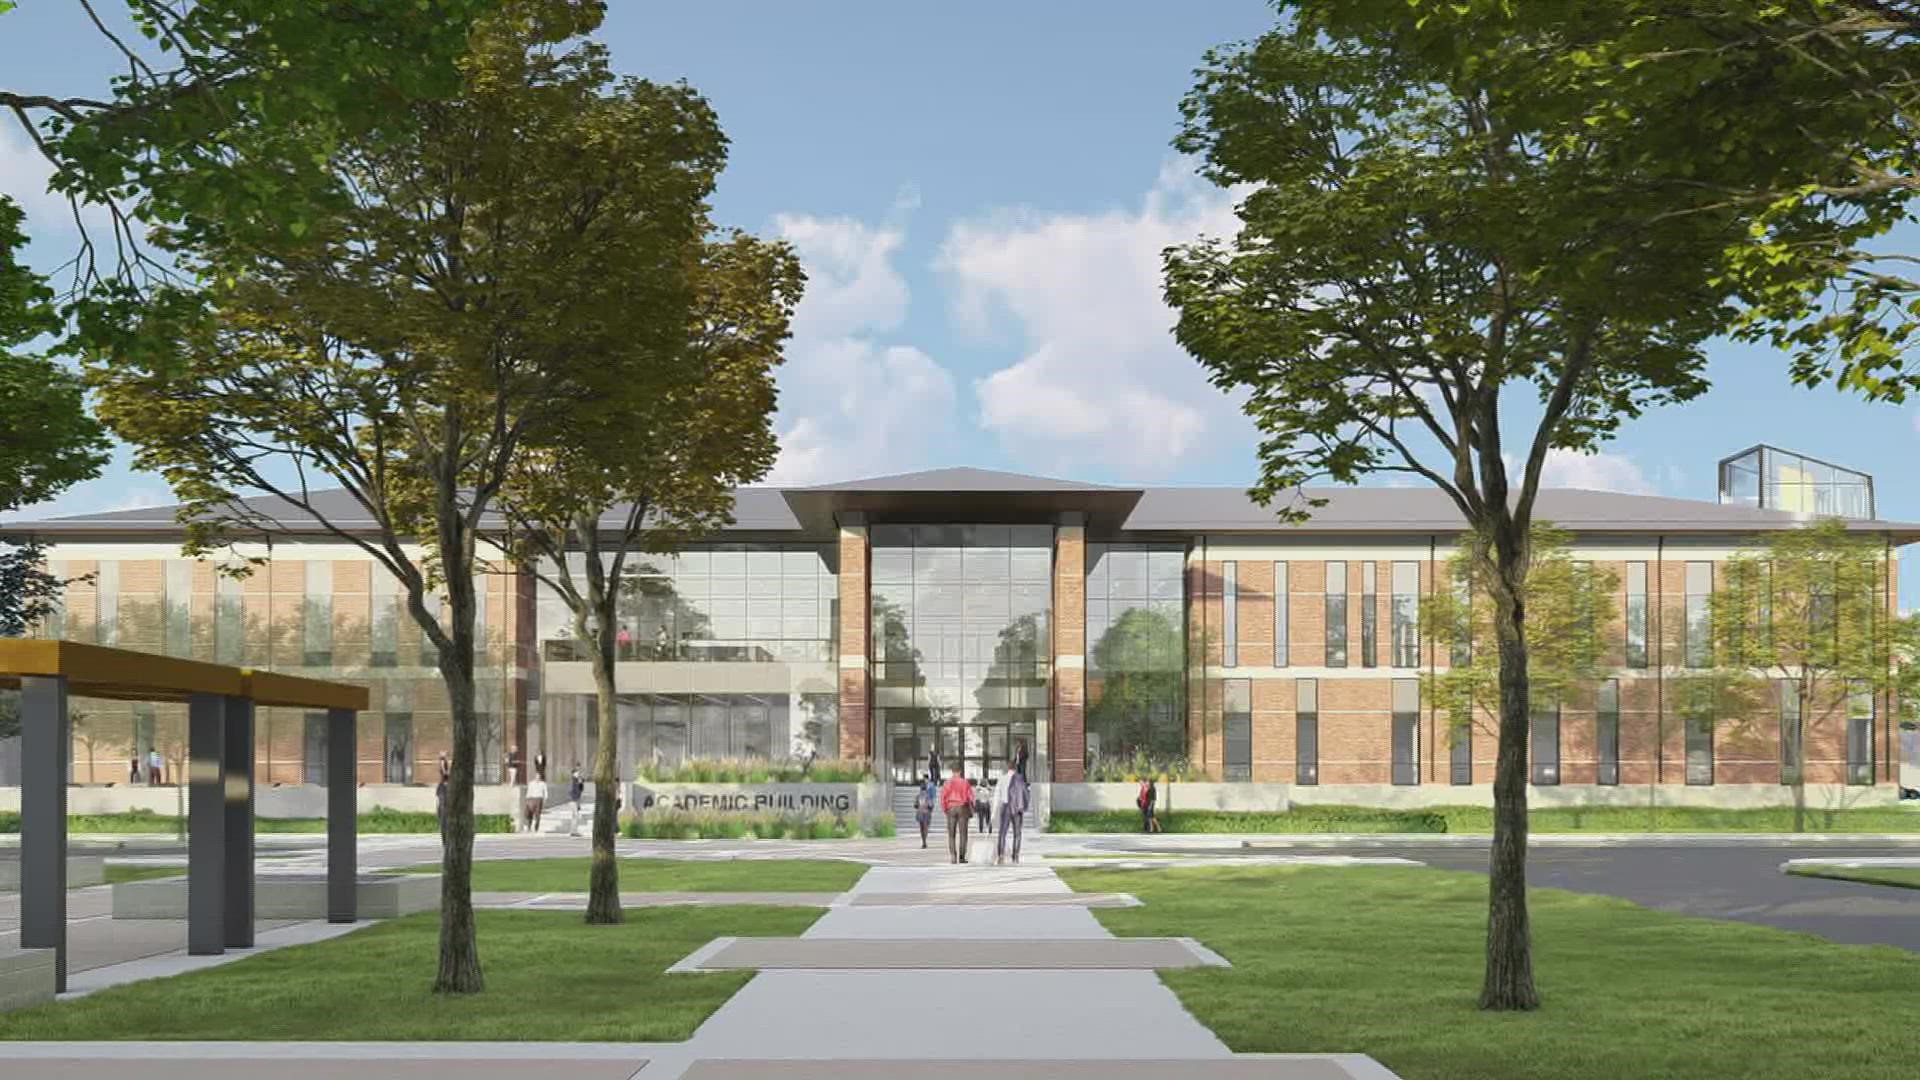 The two-story building will include new lecture classrooms, computer classrooms, faculty resource areas, science laboratories and student gathering spaces.